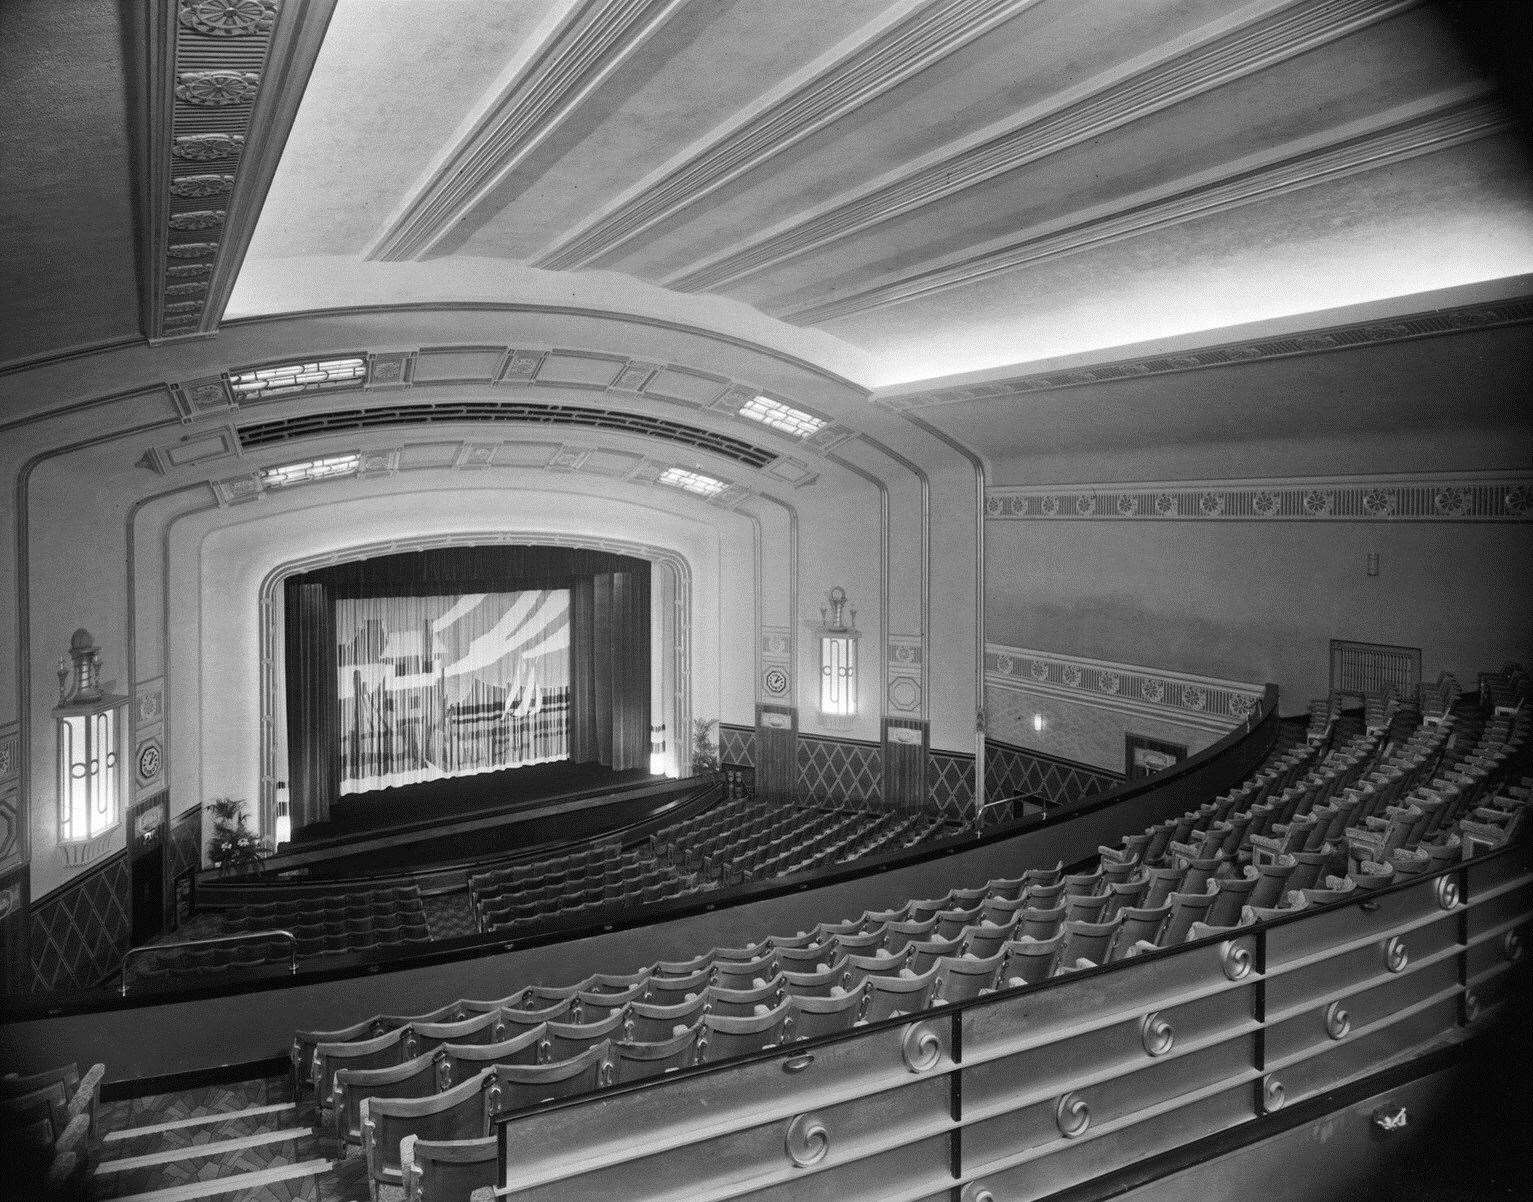 Inside the Odeon in 1936 during its first year